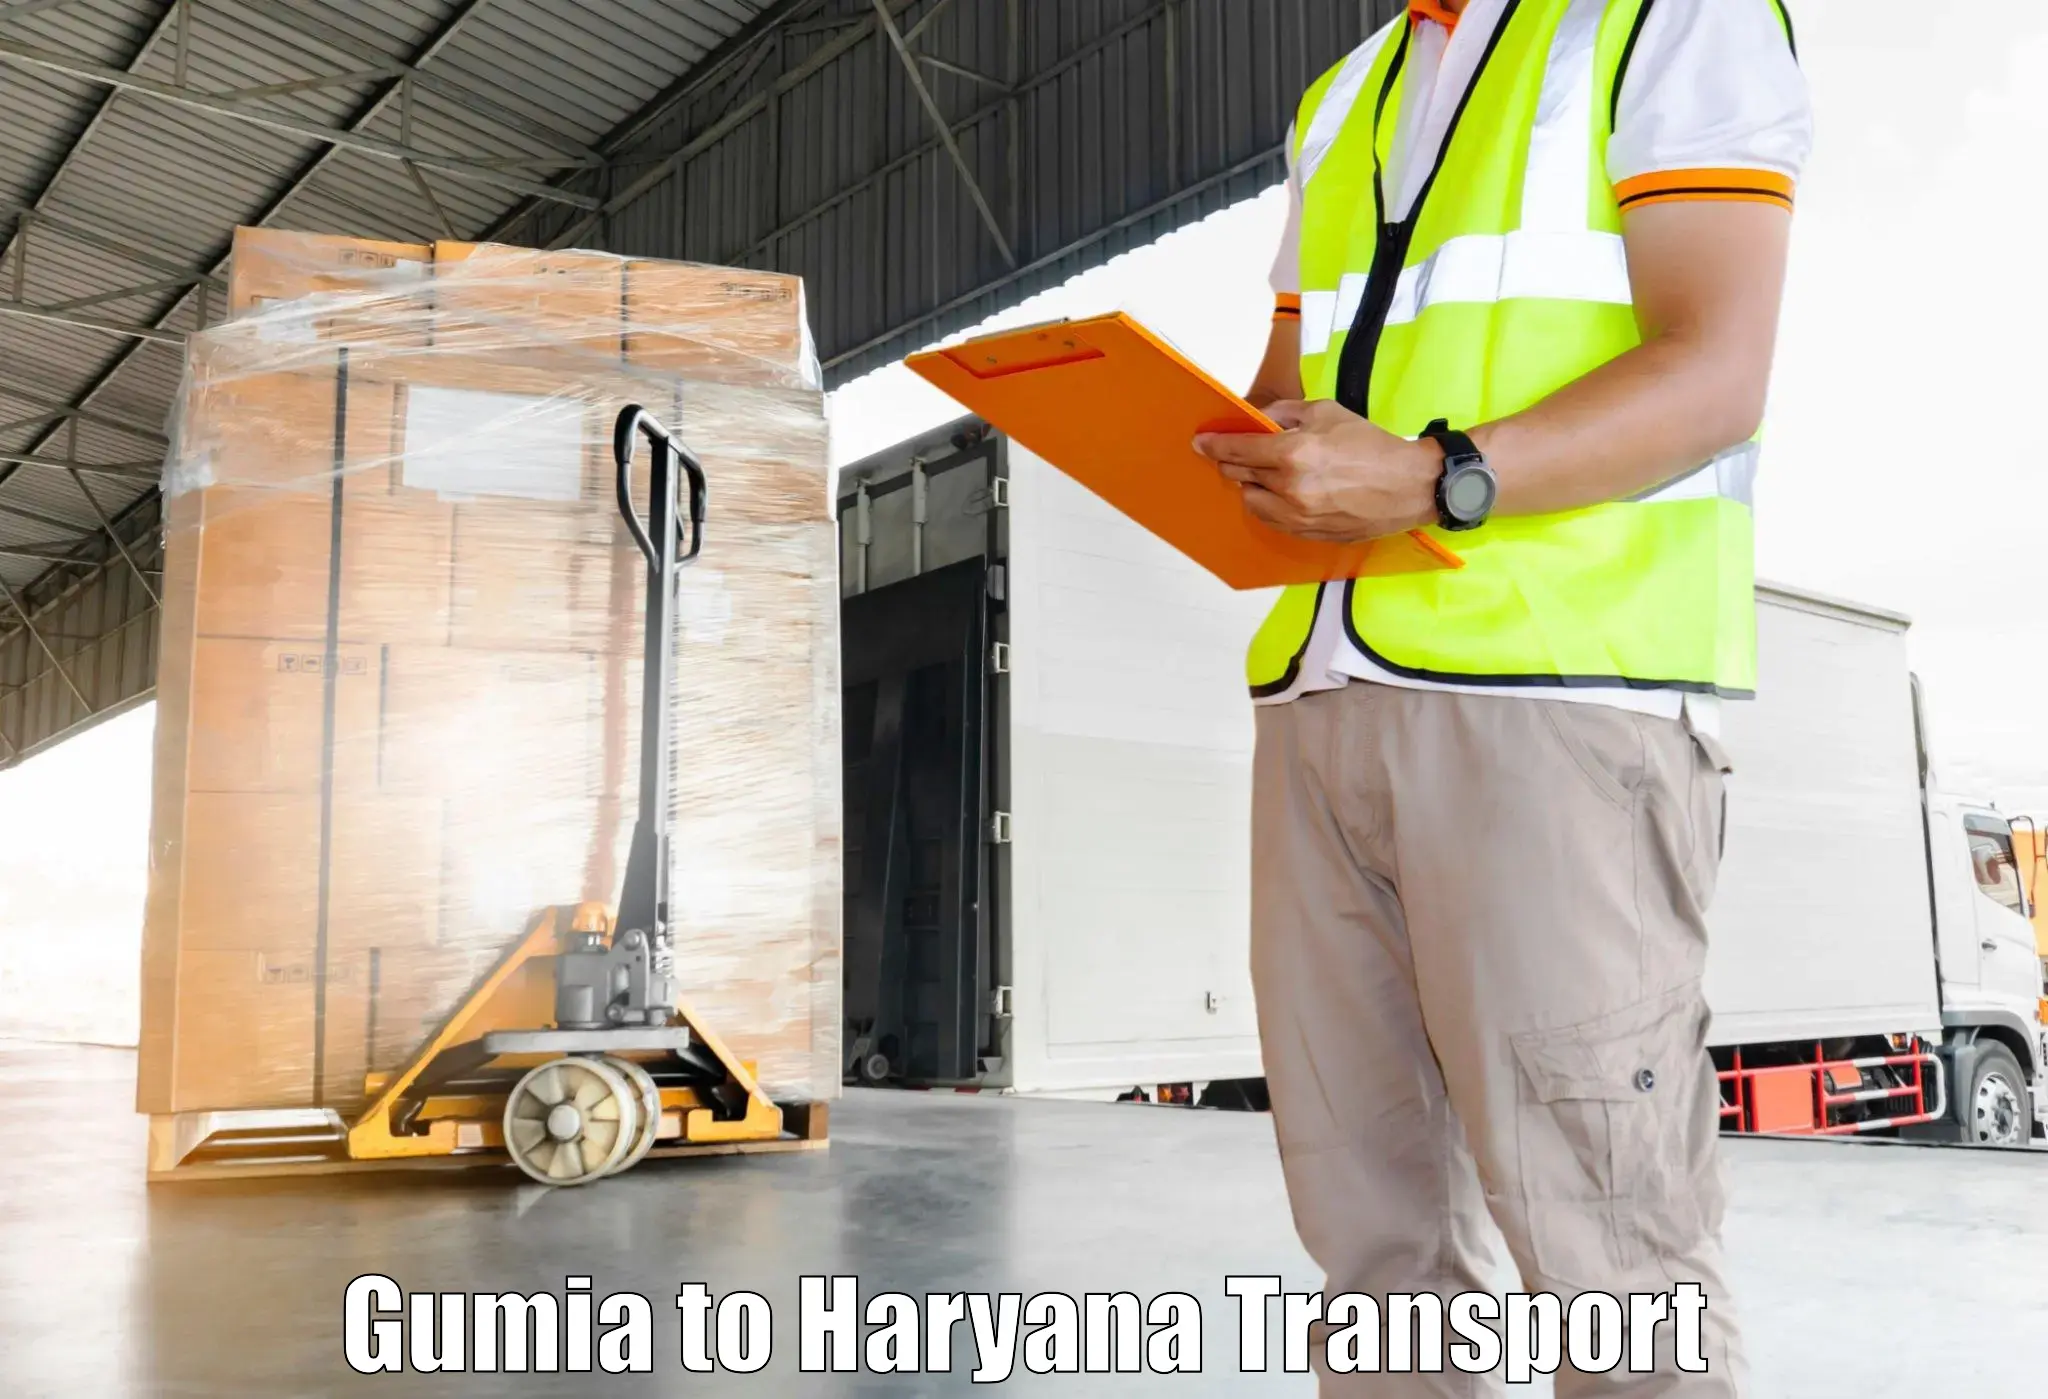 Lorry transport service Gumia to Odhan